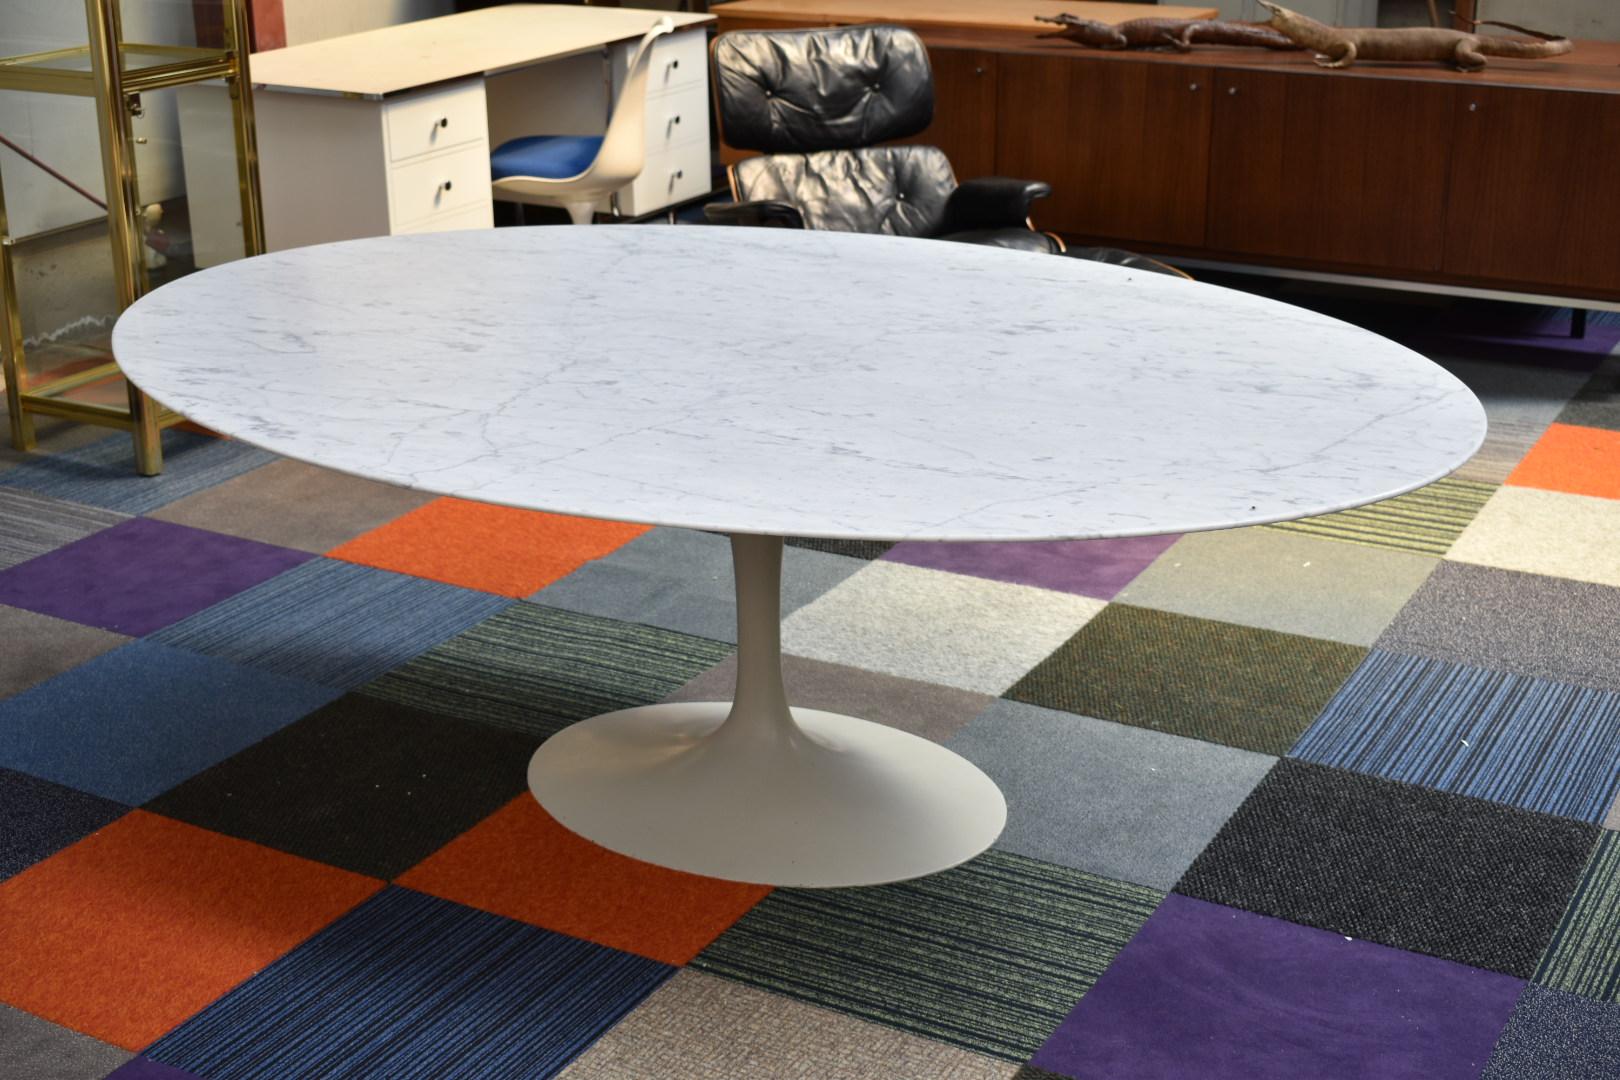 Very rare oval dining table with Carrara marble top designed by Eero Saarinen for Knoll.
This table is an early edition in a rare custom ordered size (more depth). The table has a beautiful oval shaped foot (light grey).
The marble top and foot